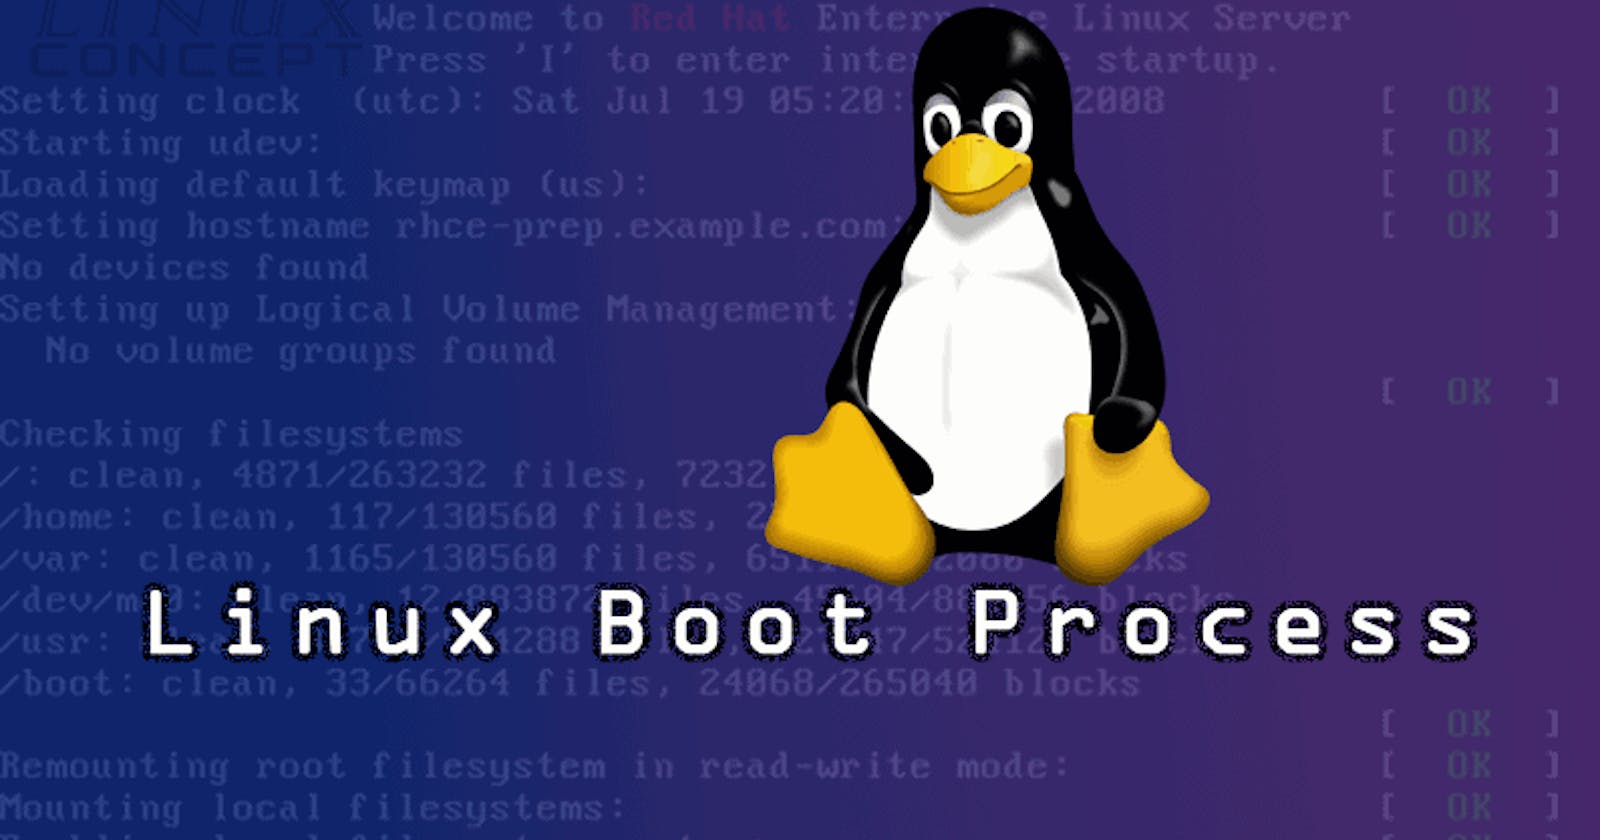 Linux boot process.